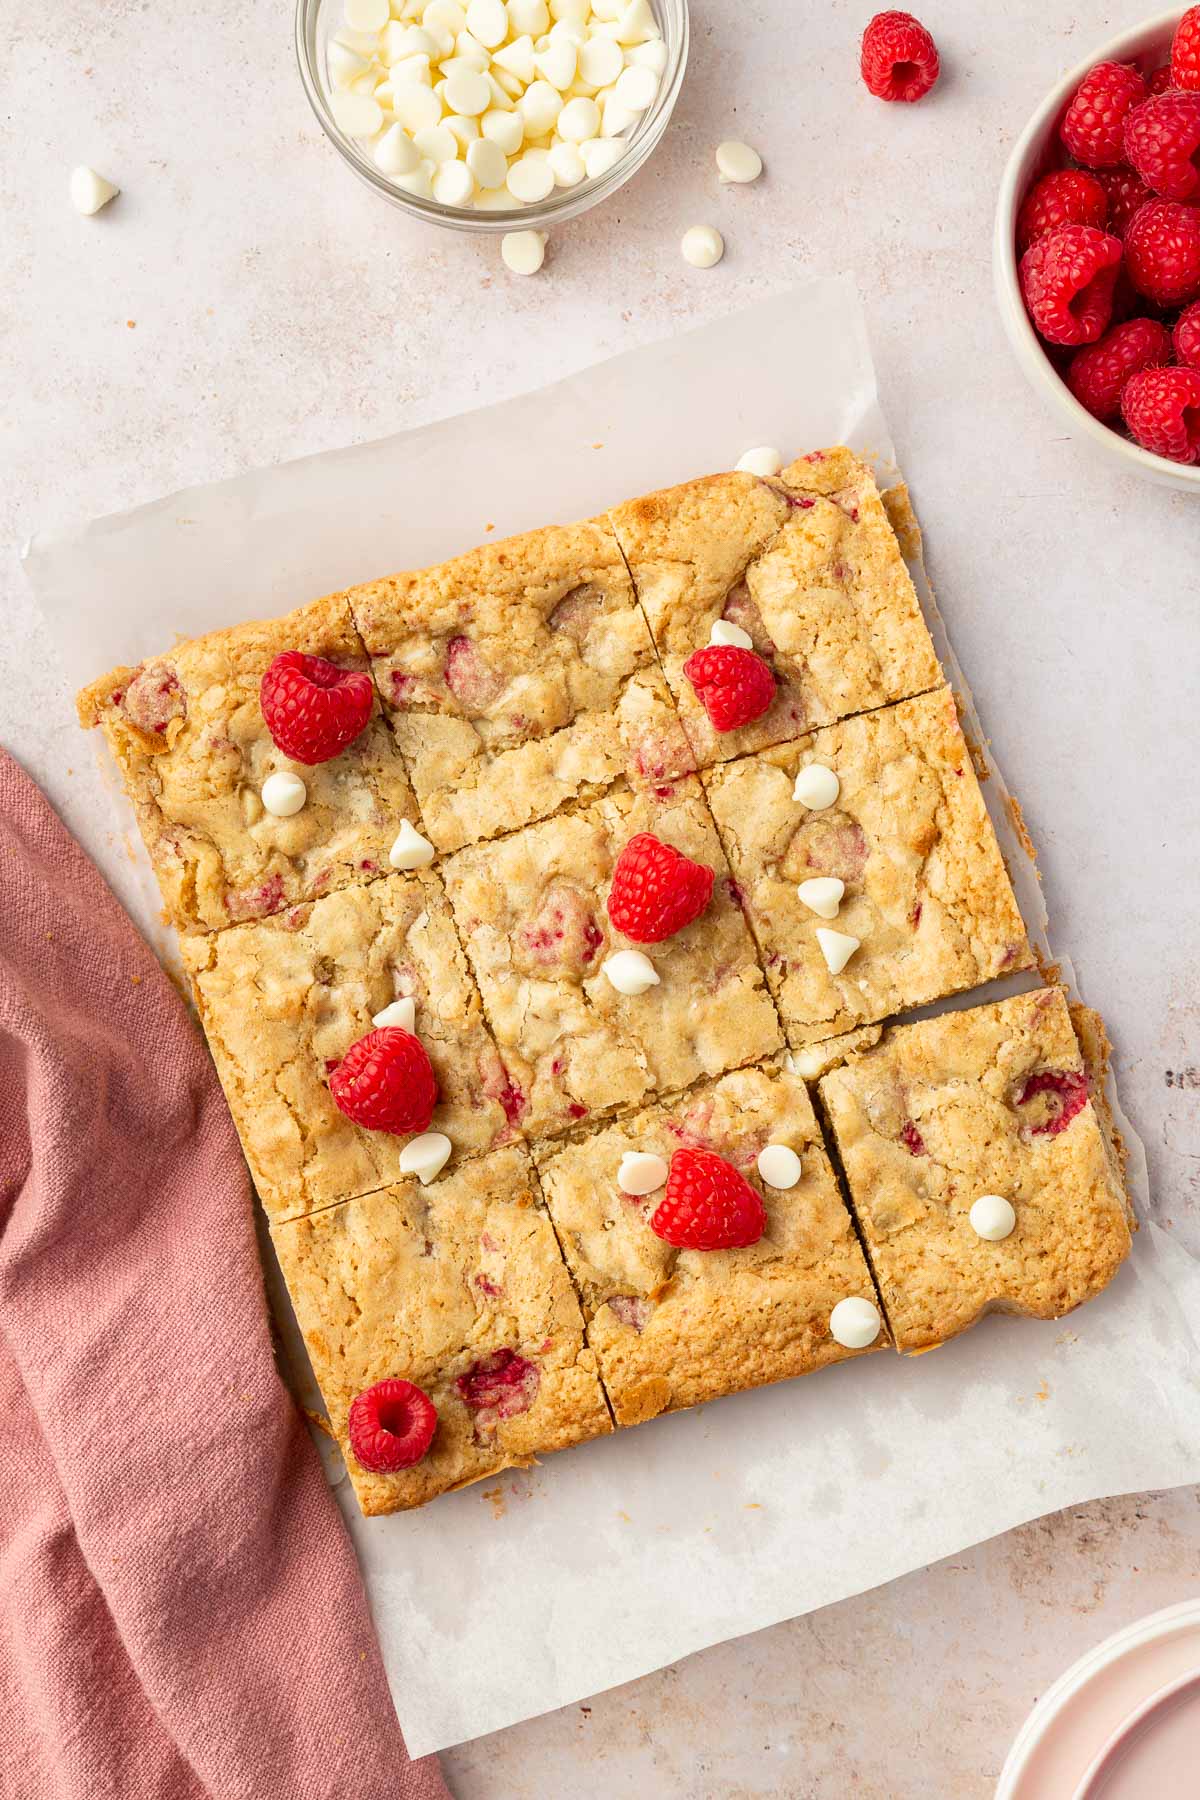 An overhead view of a slab of white chocolate raspberry blondies cut into 9 equal sections on a piece of parchment paper and decorated with fresh raspberries.